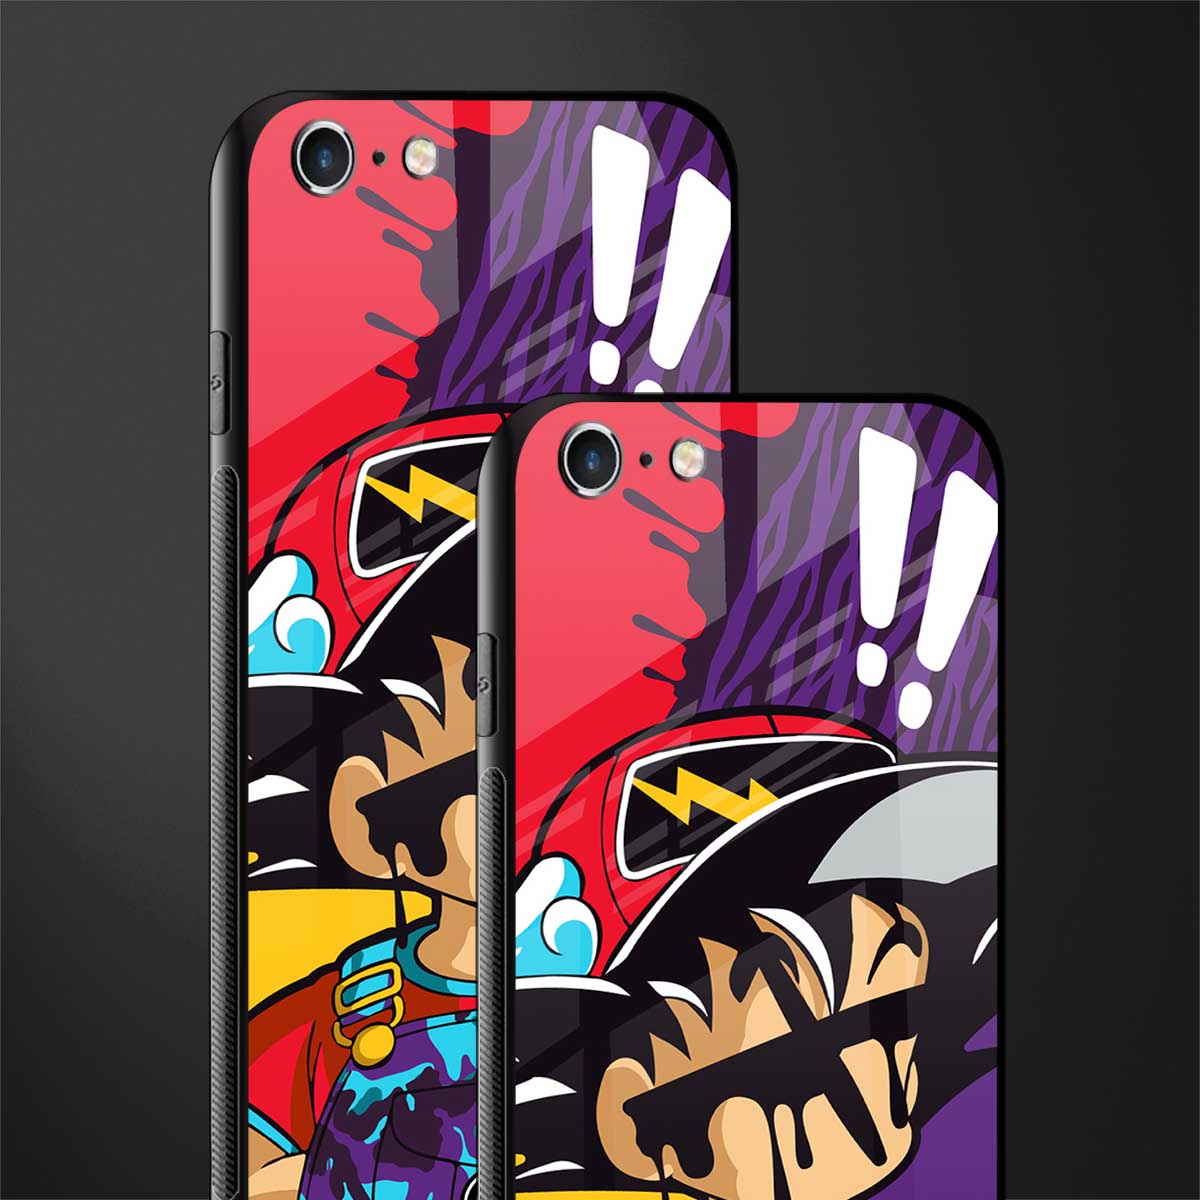 dragon ball z art phone cover for iphone 6s plus